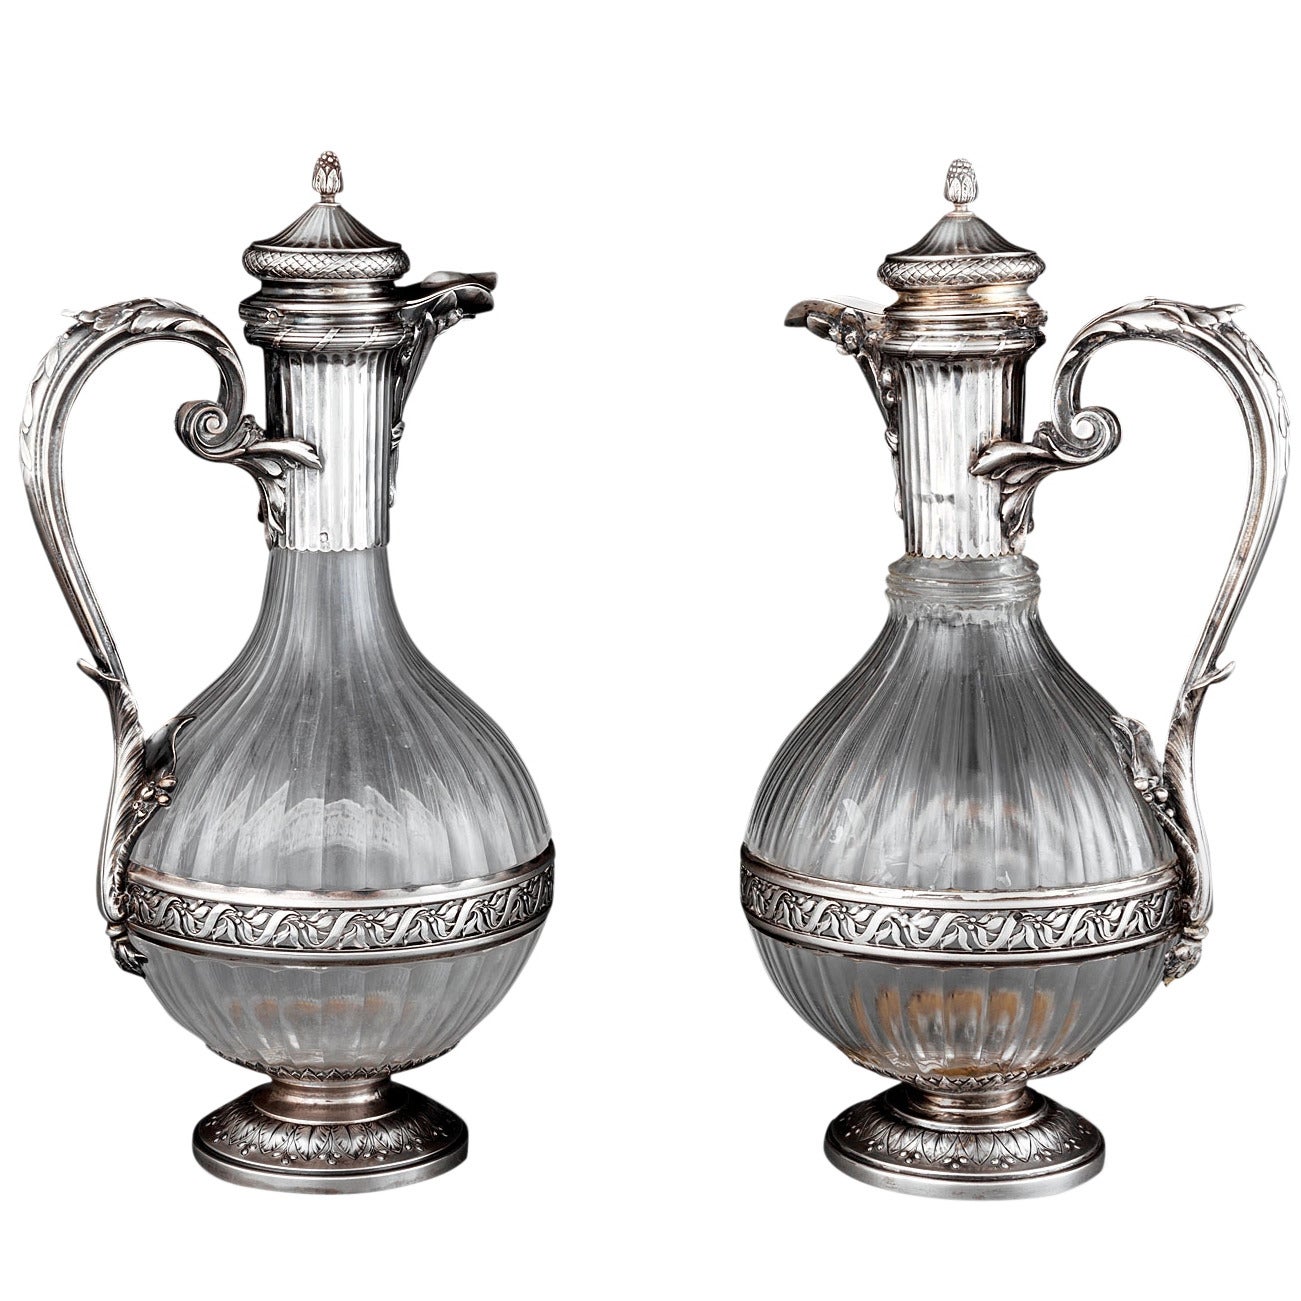 Near Pair of Silver Mounted Crystal Claret Jugs by Boin-Taburet, Paris